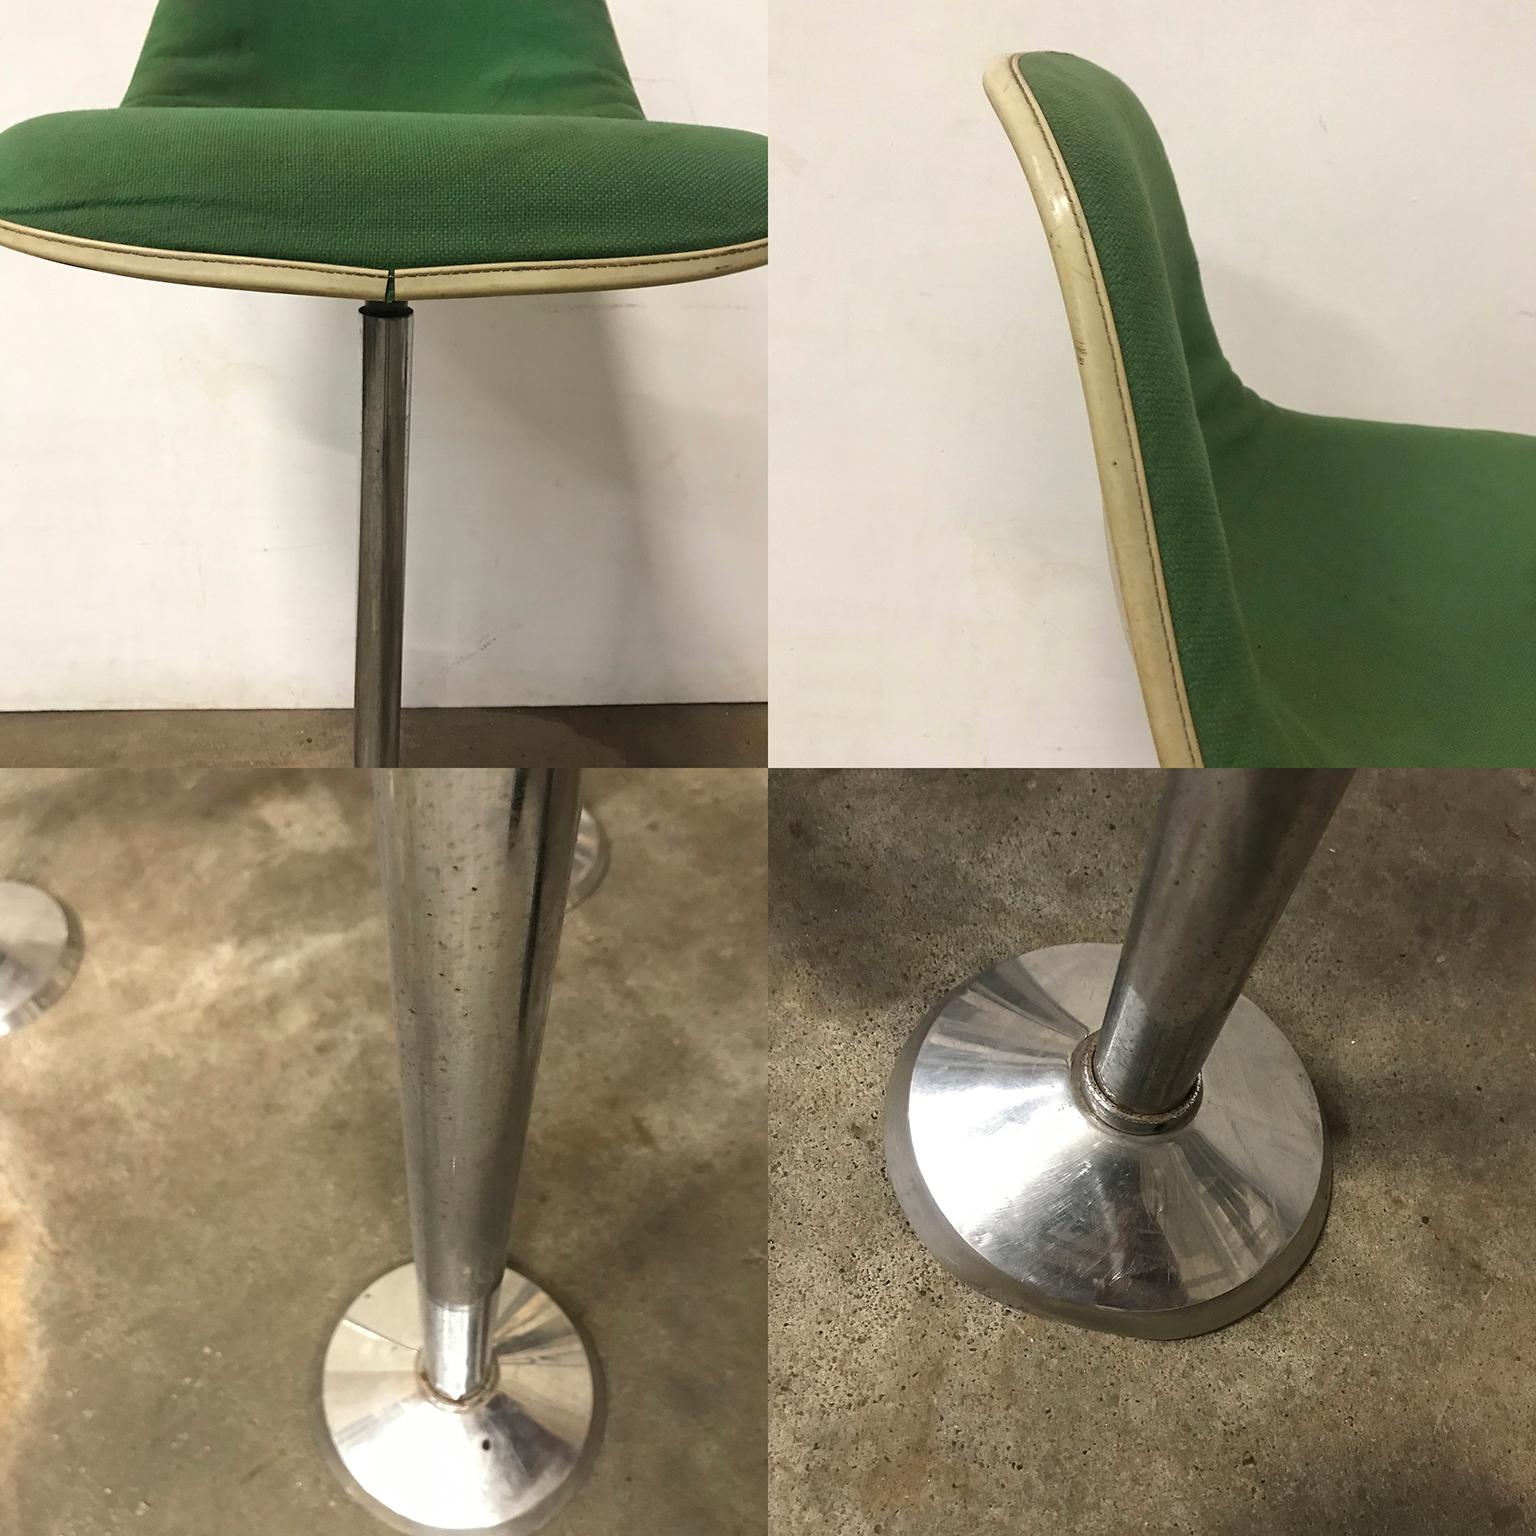 1969 Eames Herman Miller/Fehlbaum Extremely Rare White Barstools in Green Fabric For Sale 10